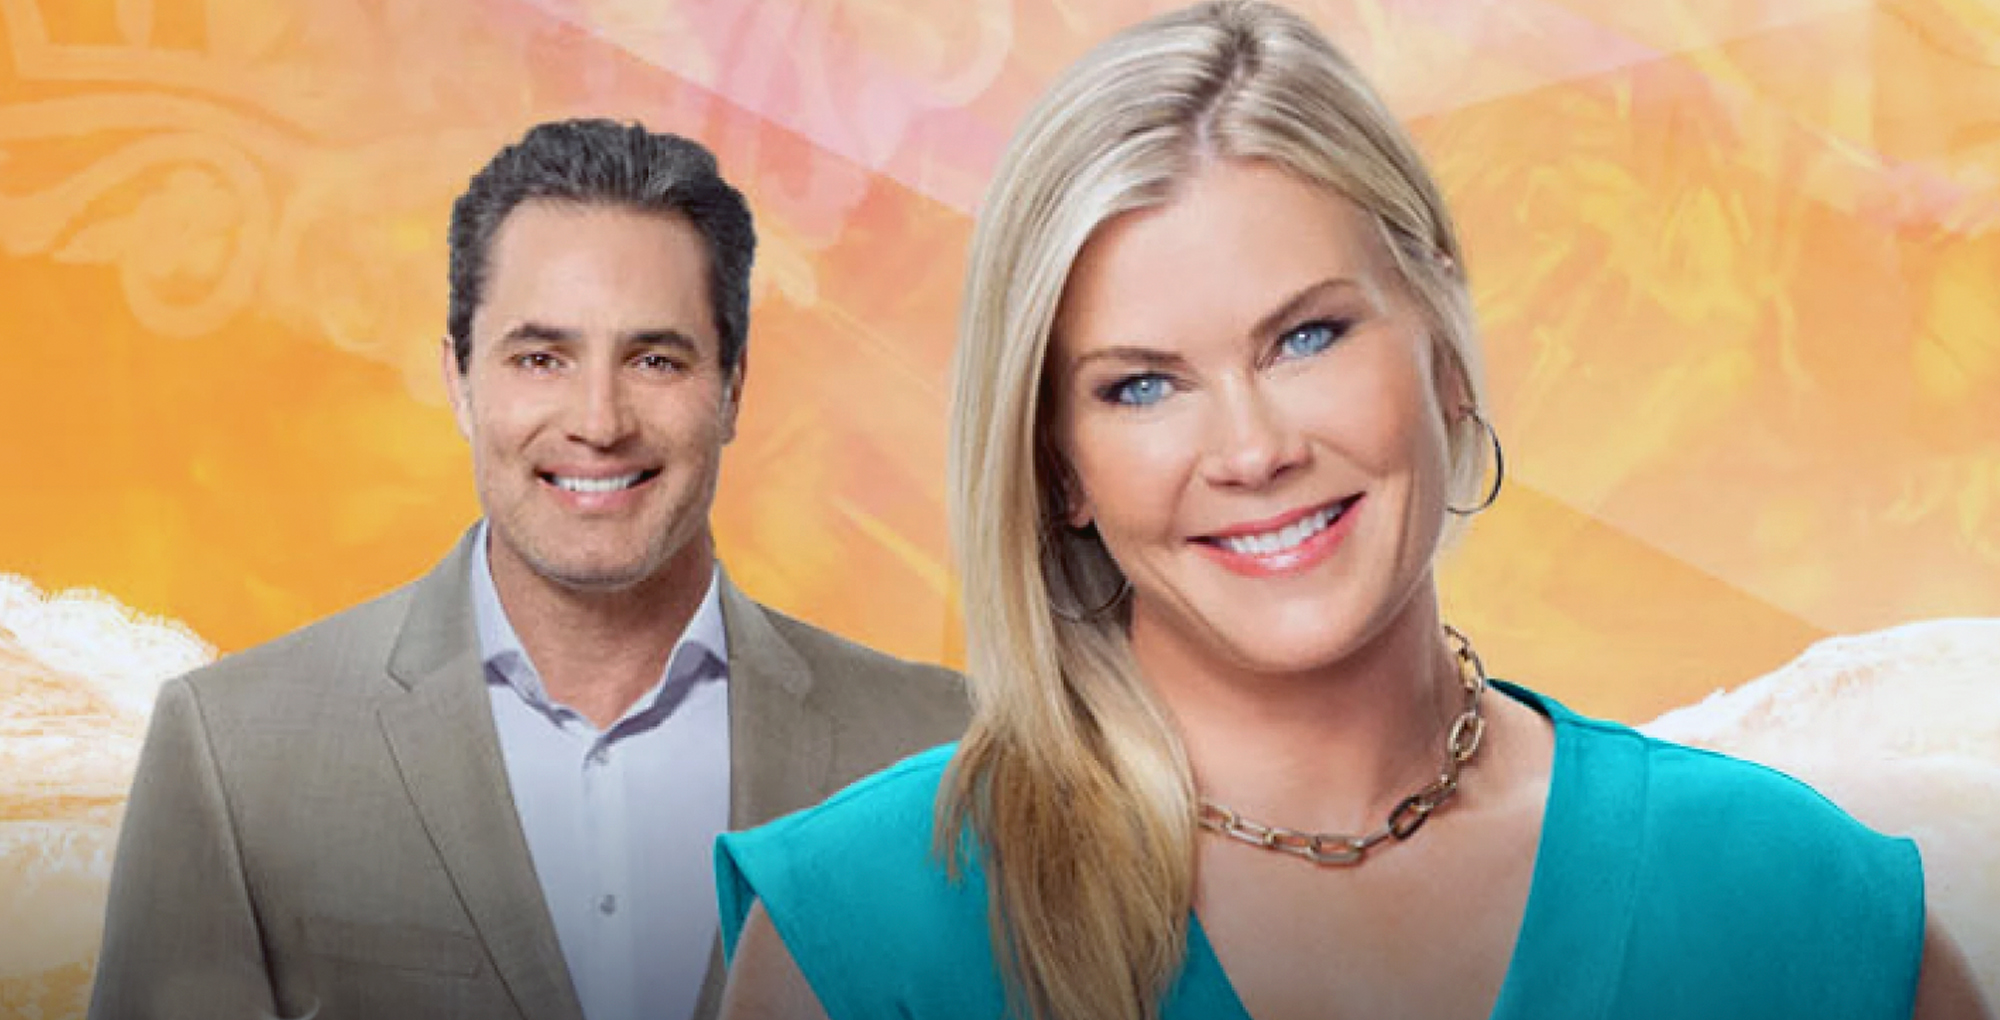 days of our lives alums alison sweeney and victor webster reunite for hallmark